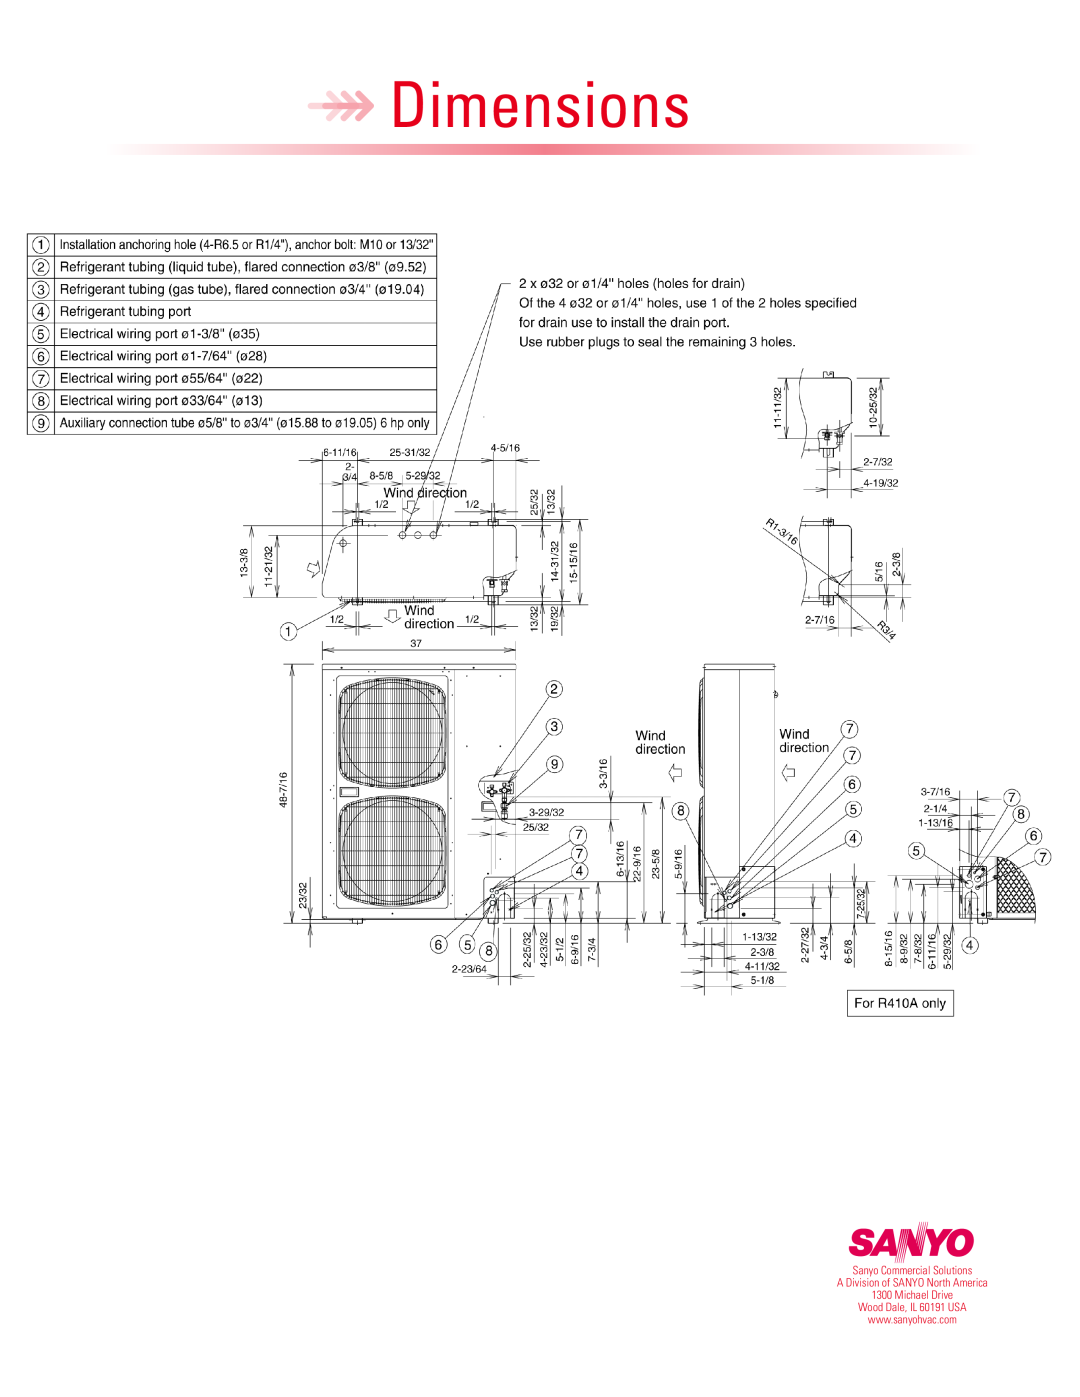 Sanyo CHX05252 warranty Dimensions, Sanyo Commercial Solutions, A Division of SANYO North America 